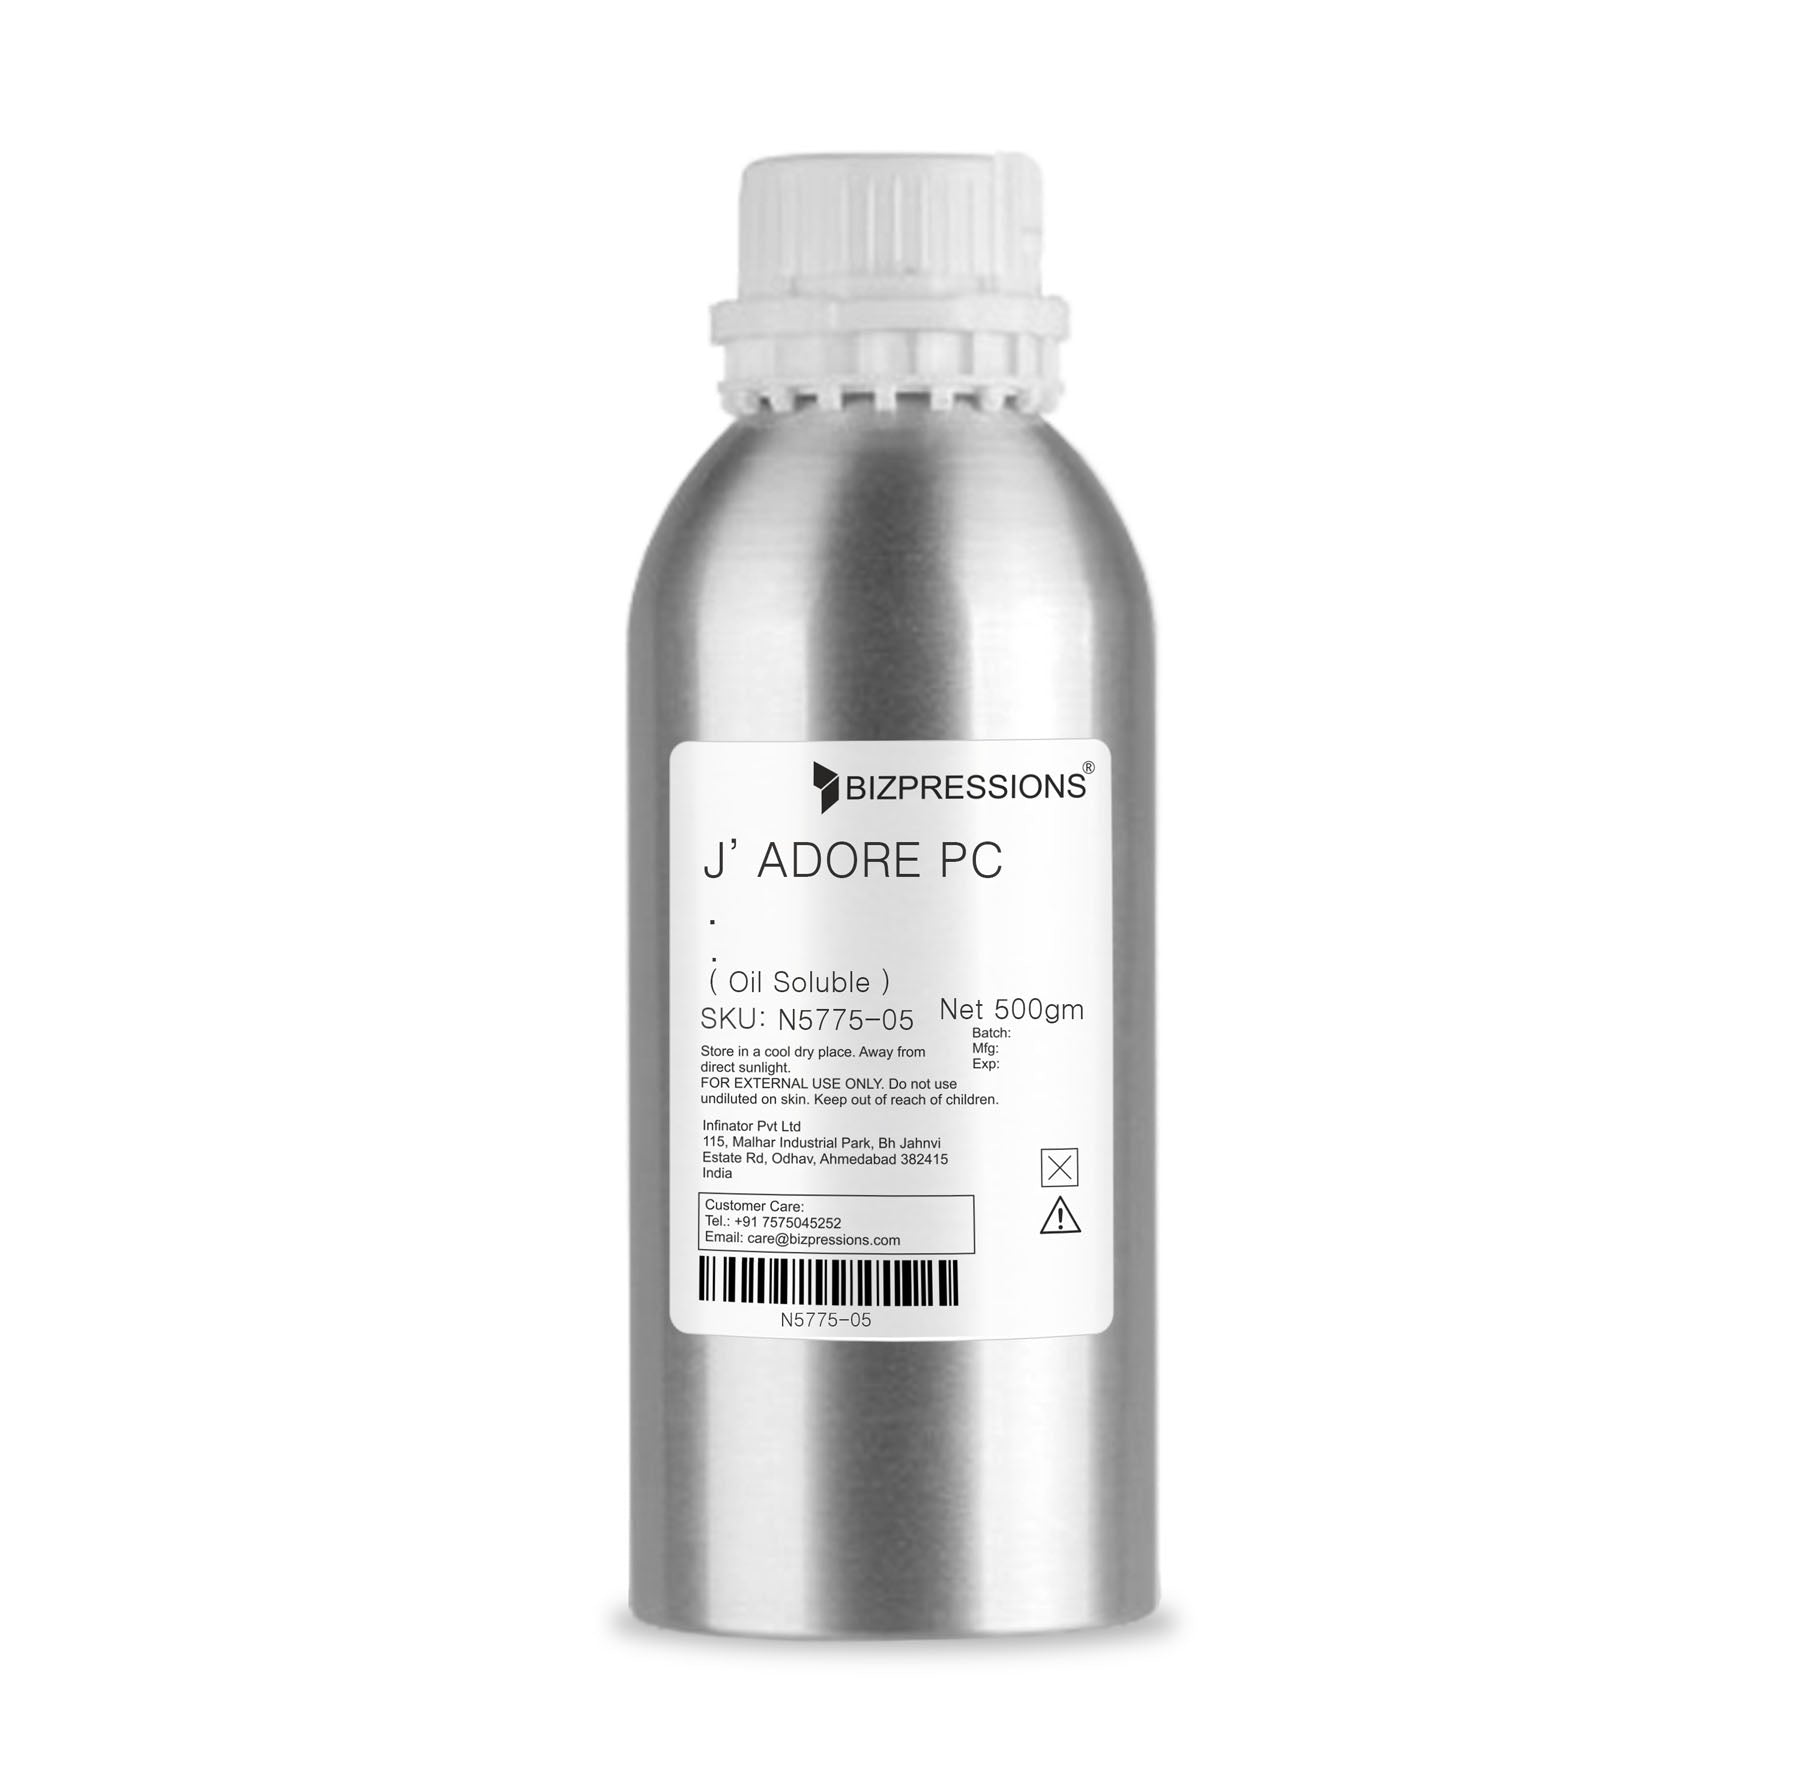 J’ ADORE PC - Fragrance ( Oil Soluble ) - 500 gm